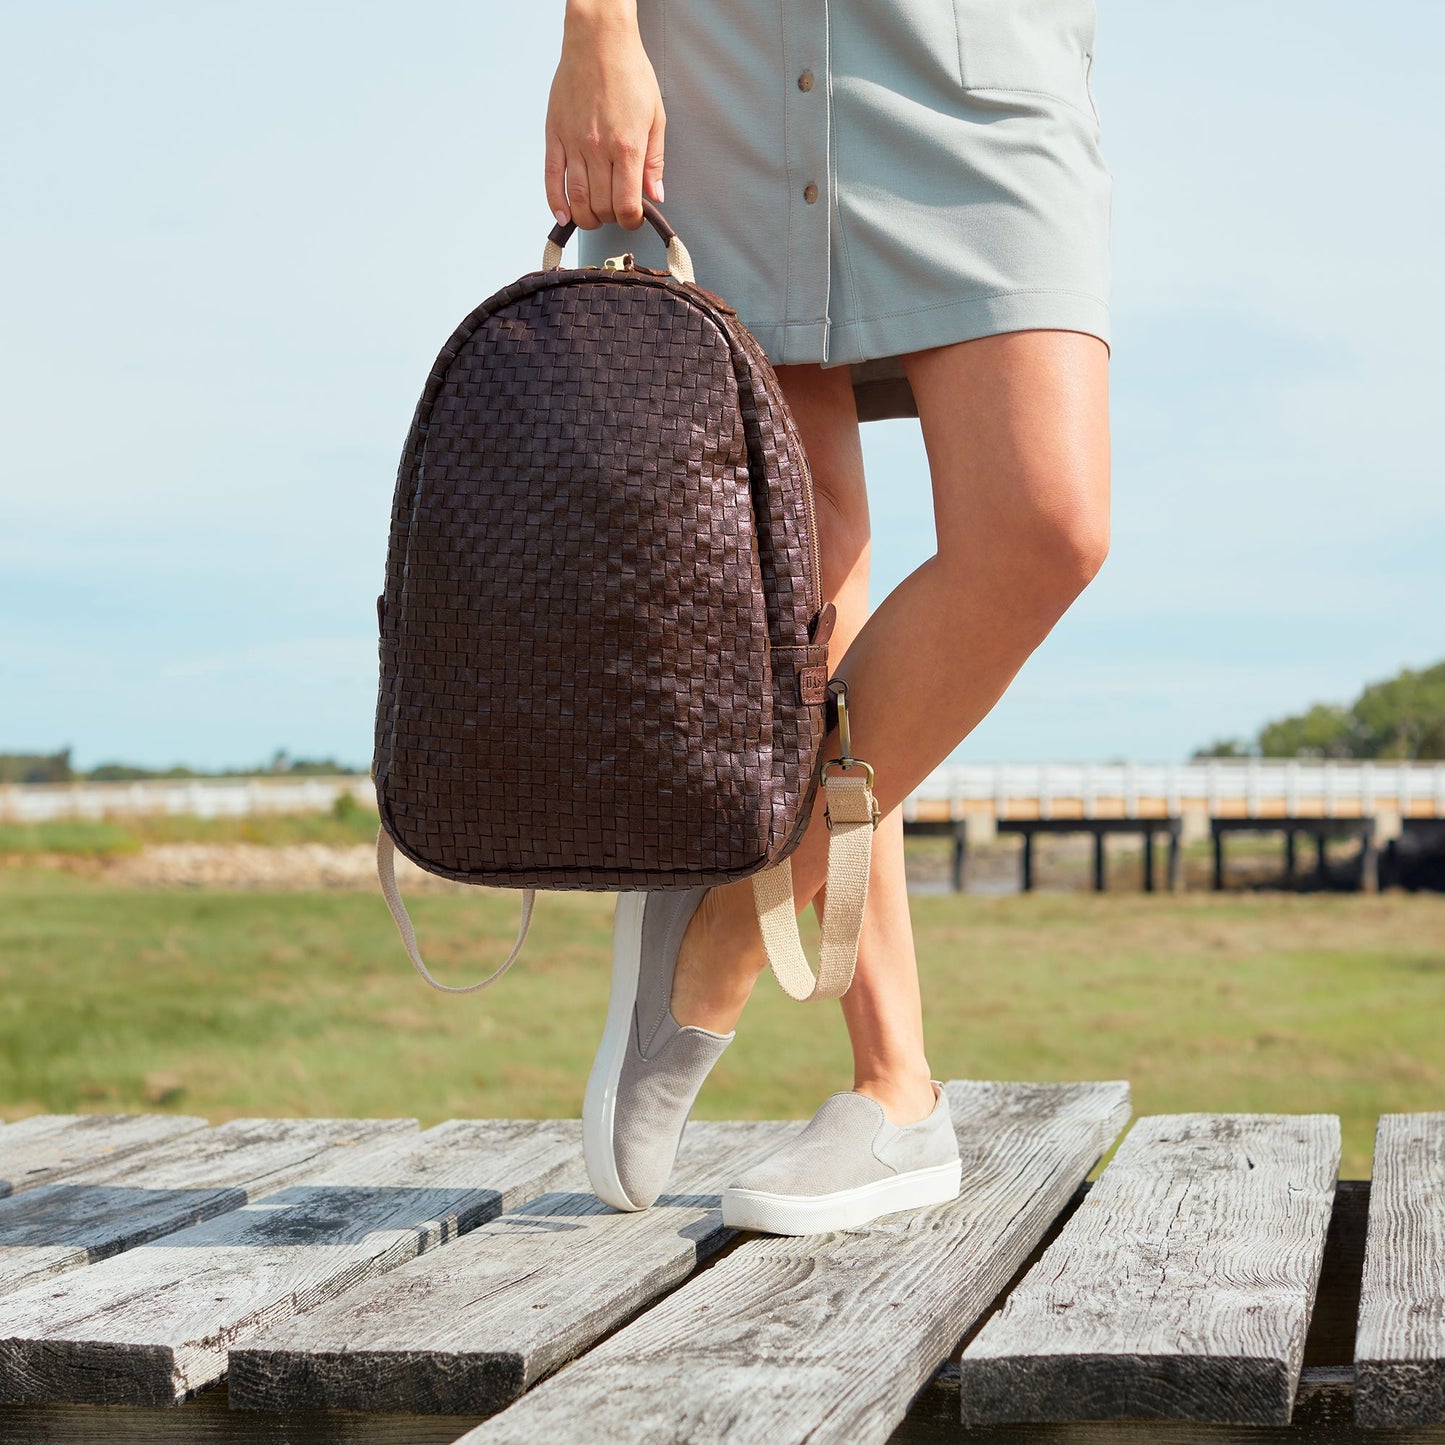 A woman is shown standing on decking, wearing a dress and plimsolls. In her right hand she holds a chocolate brown washable paper backpack by its top handle. 